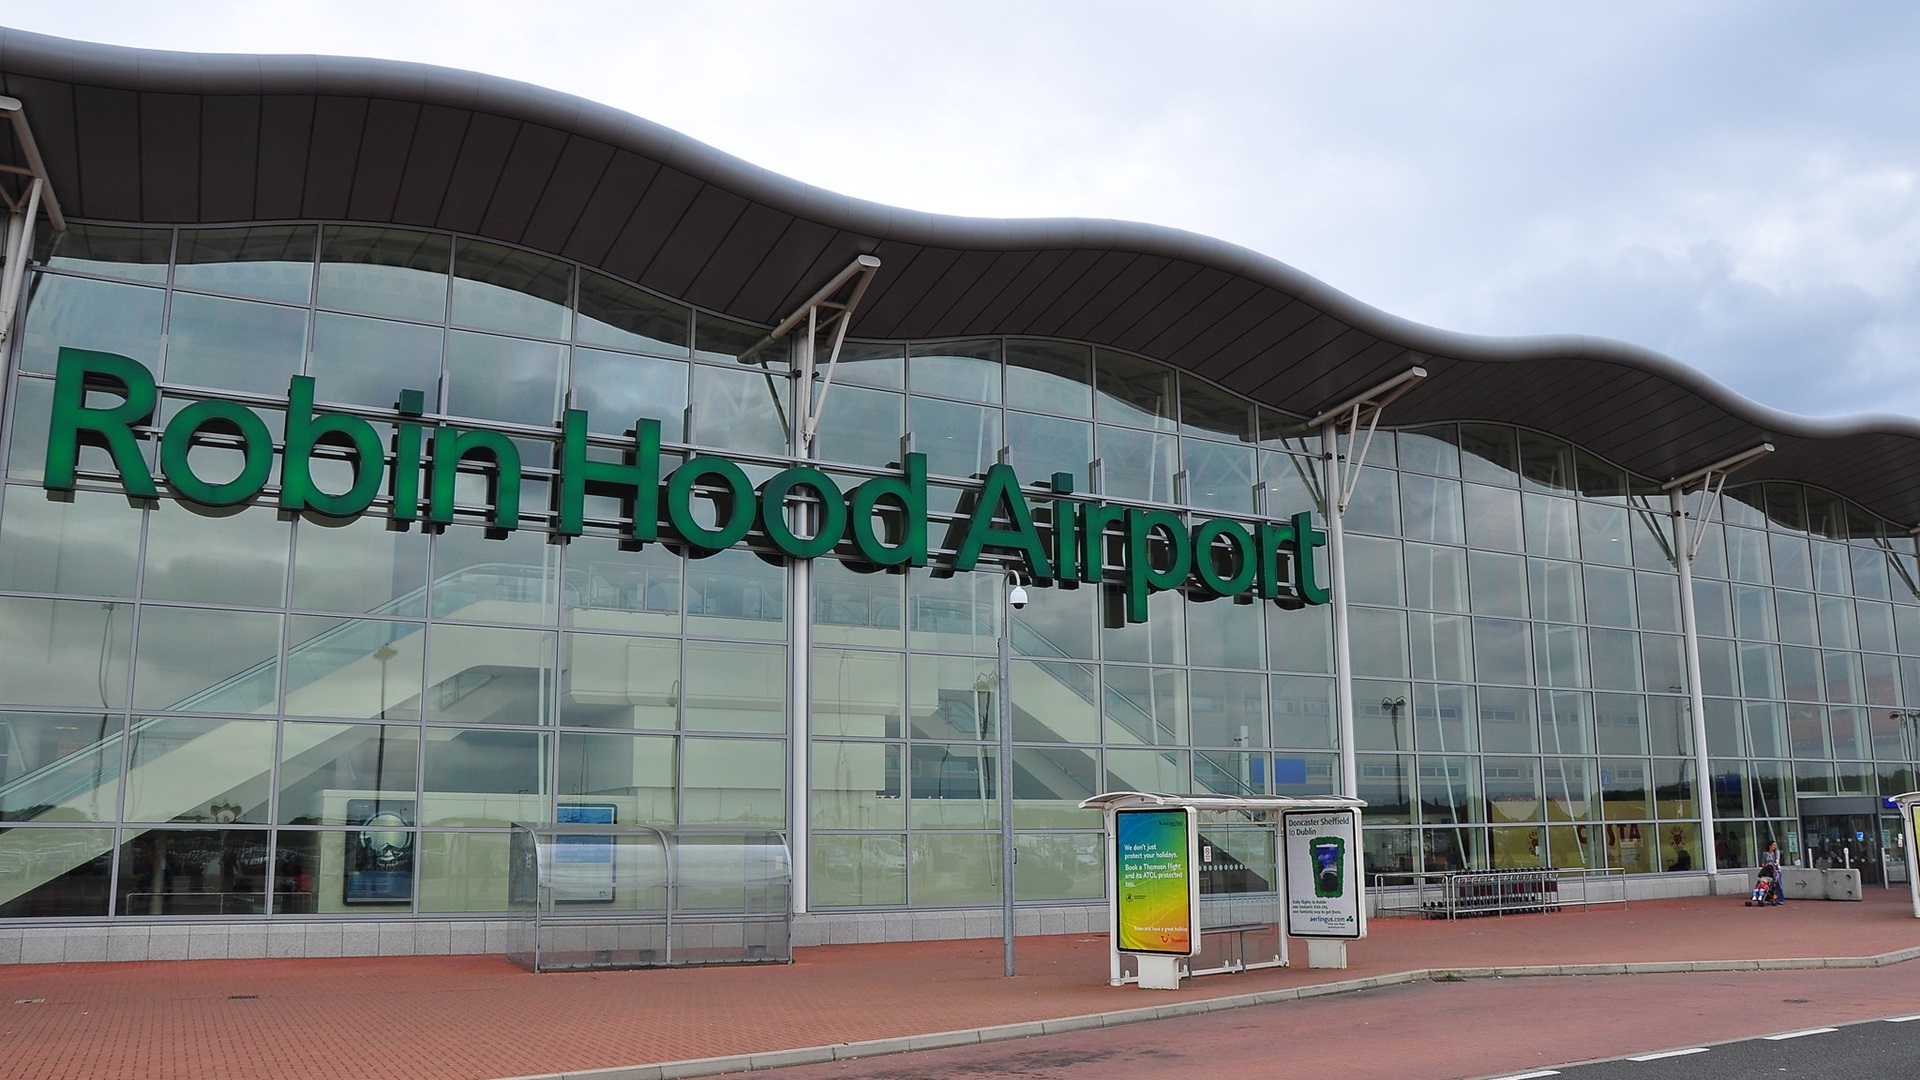 Robin Hood Airport is one of the airports considered for the idea